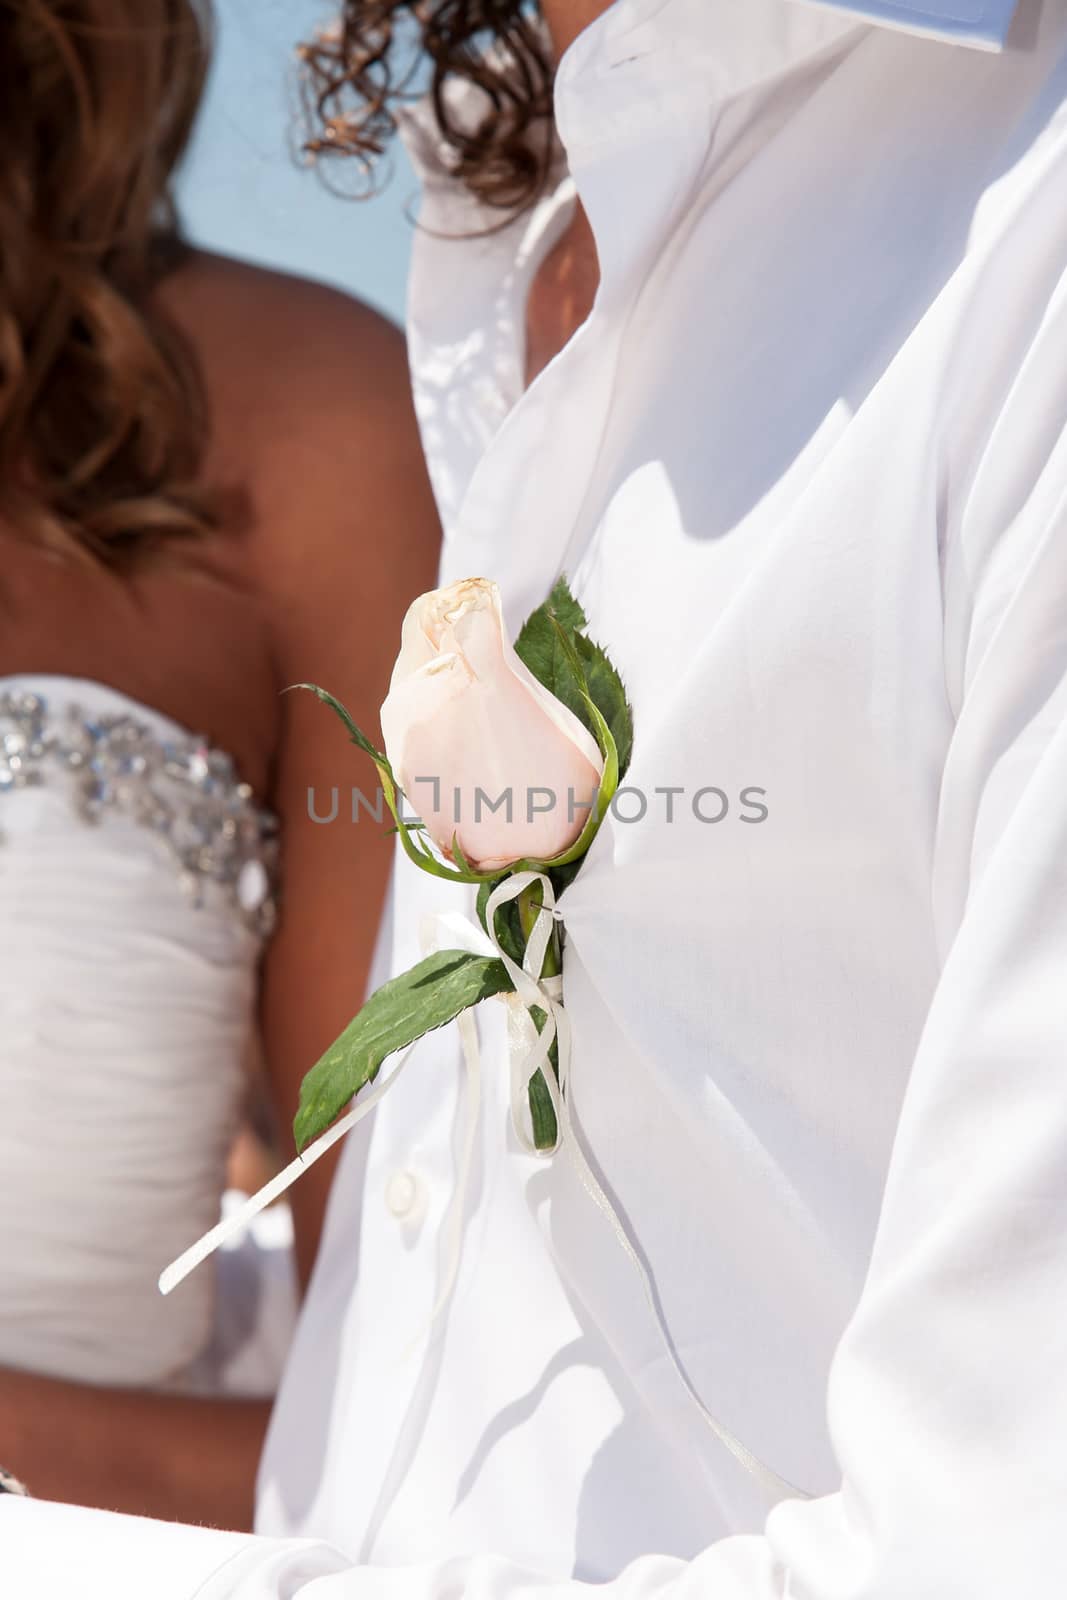 flower on groom's shirt by smoxx